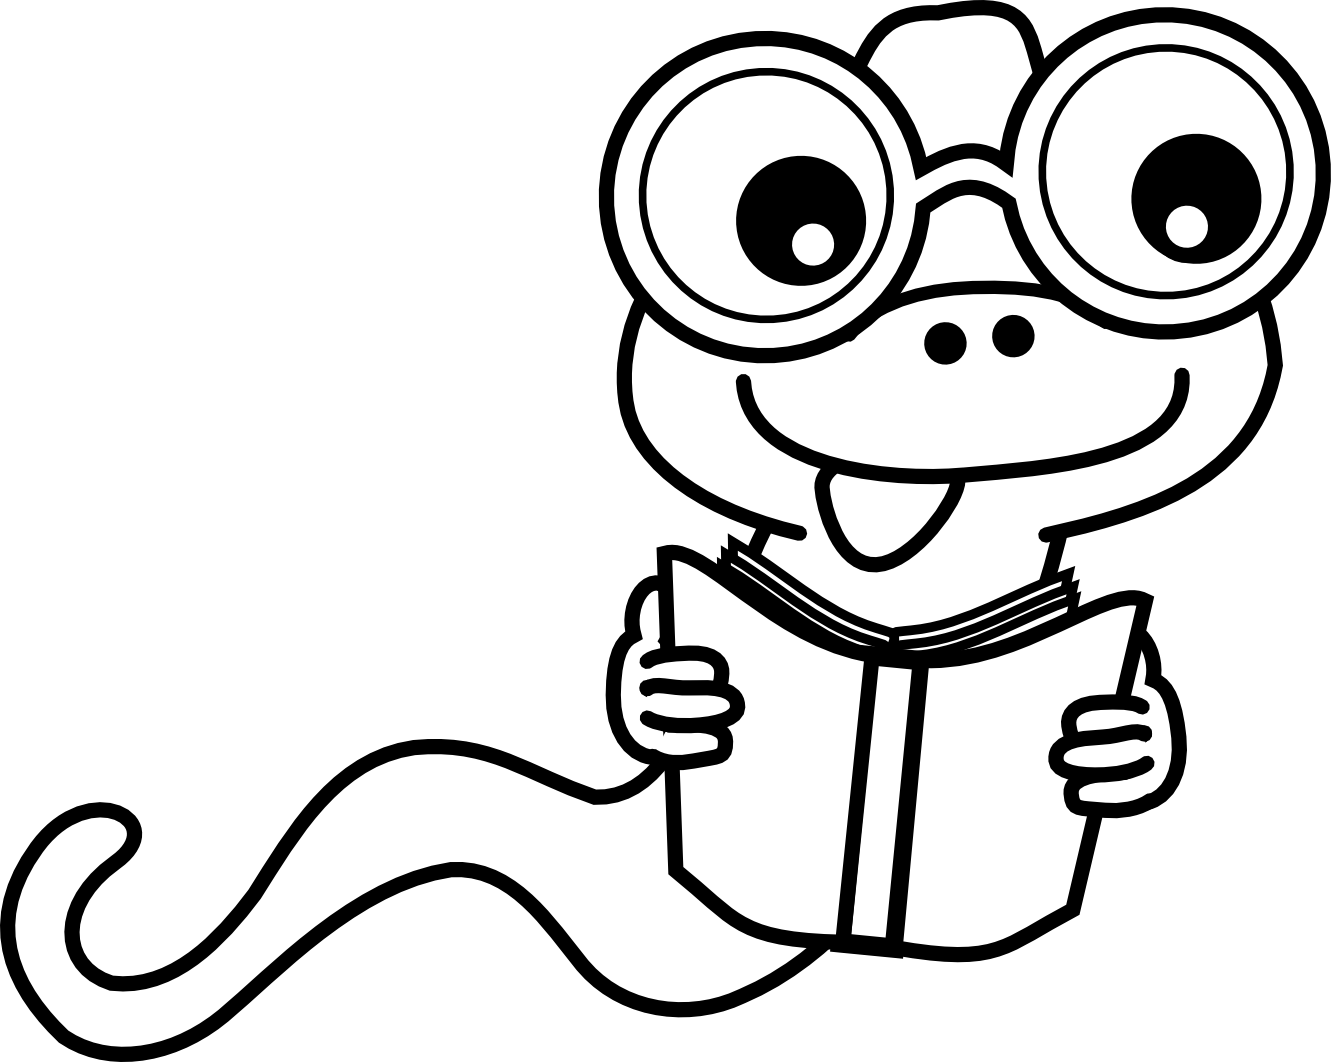 Cute reading clipart black and white